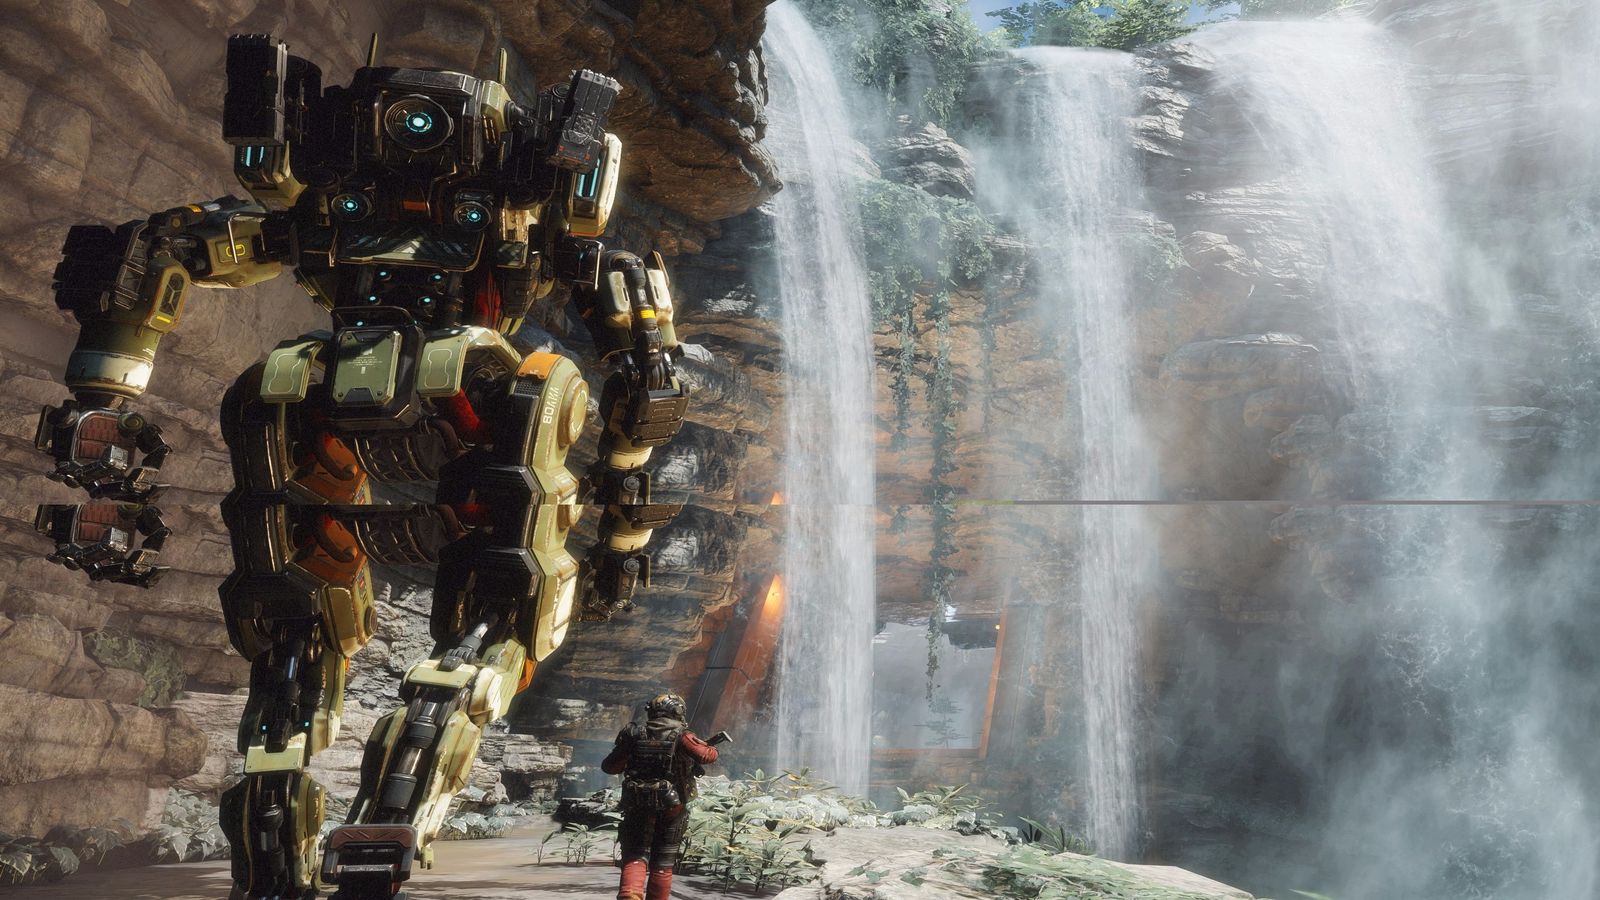 You can talk to the Titans in Titanfall 2's campaign